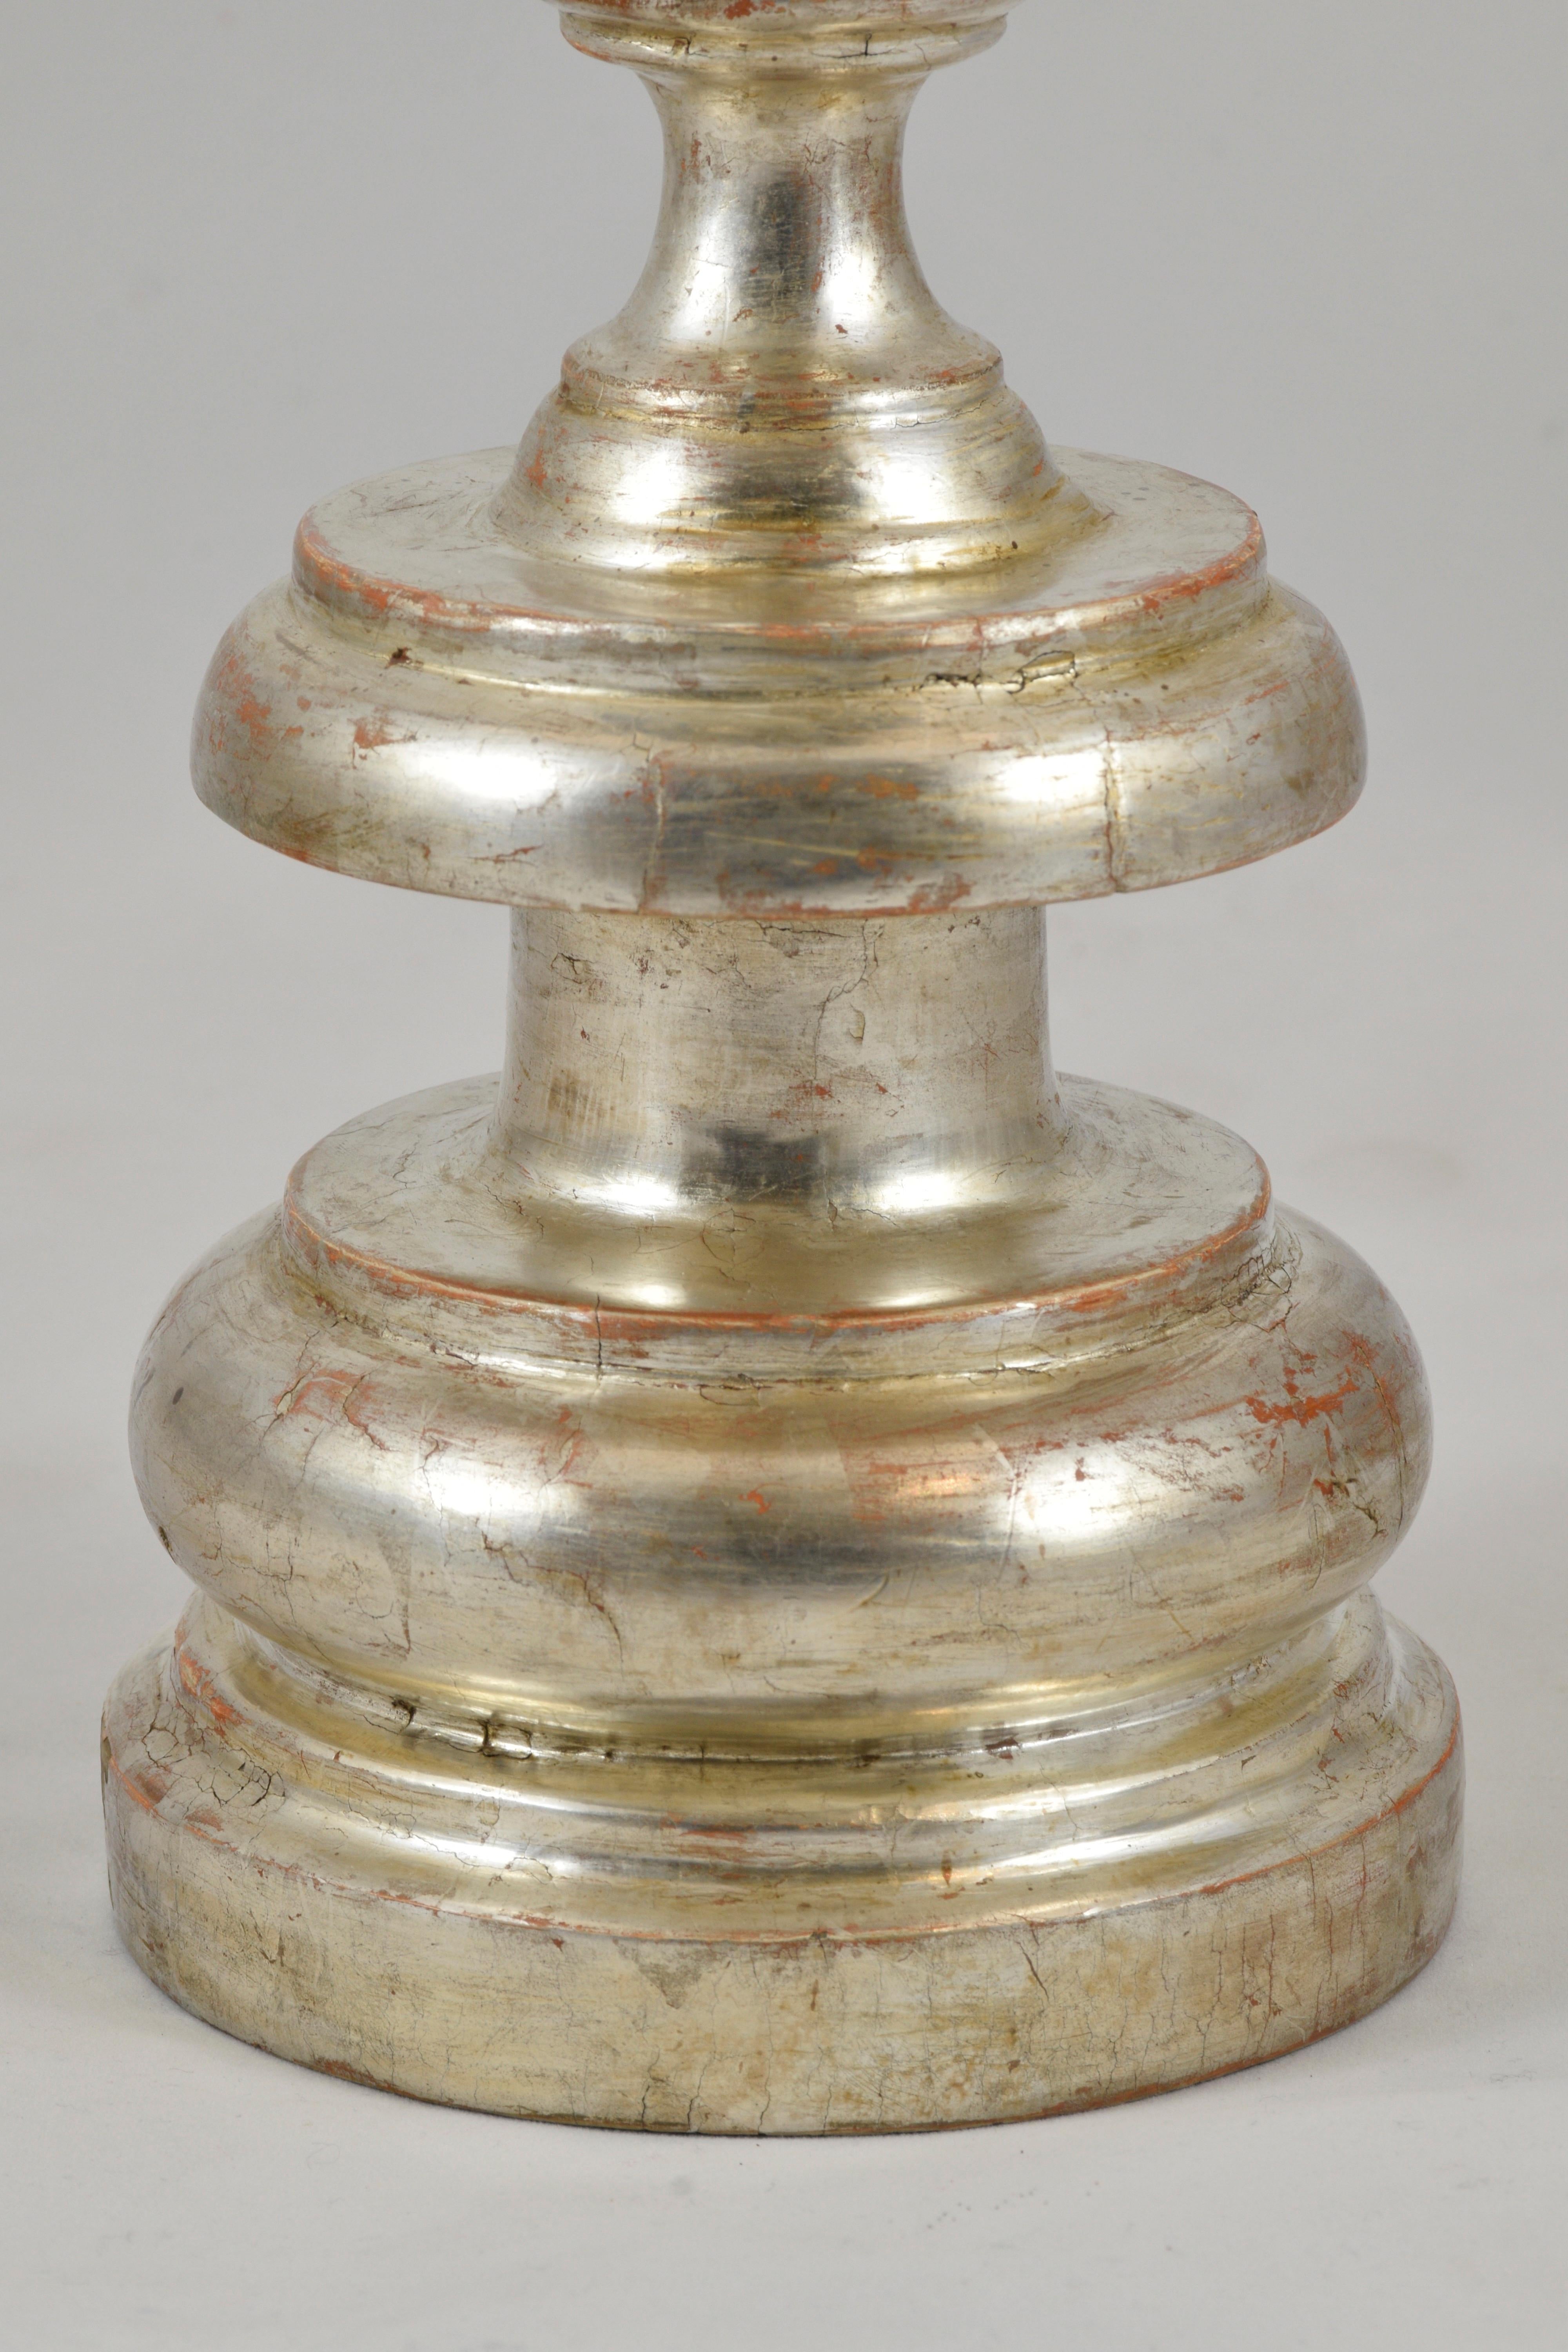 Renaissance Florentine Candlestick in Lathed and Silvered Wood, Late 17th Century For Sale